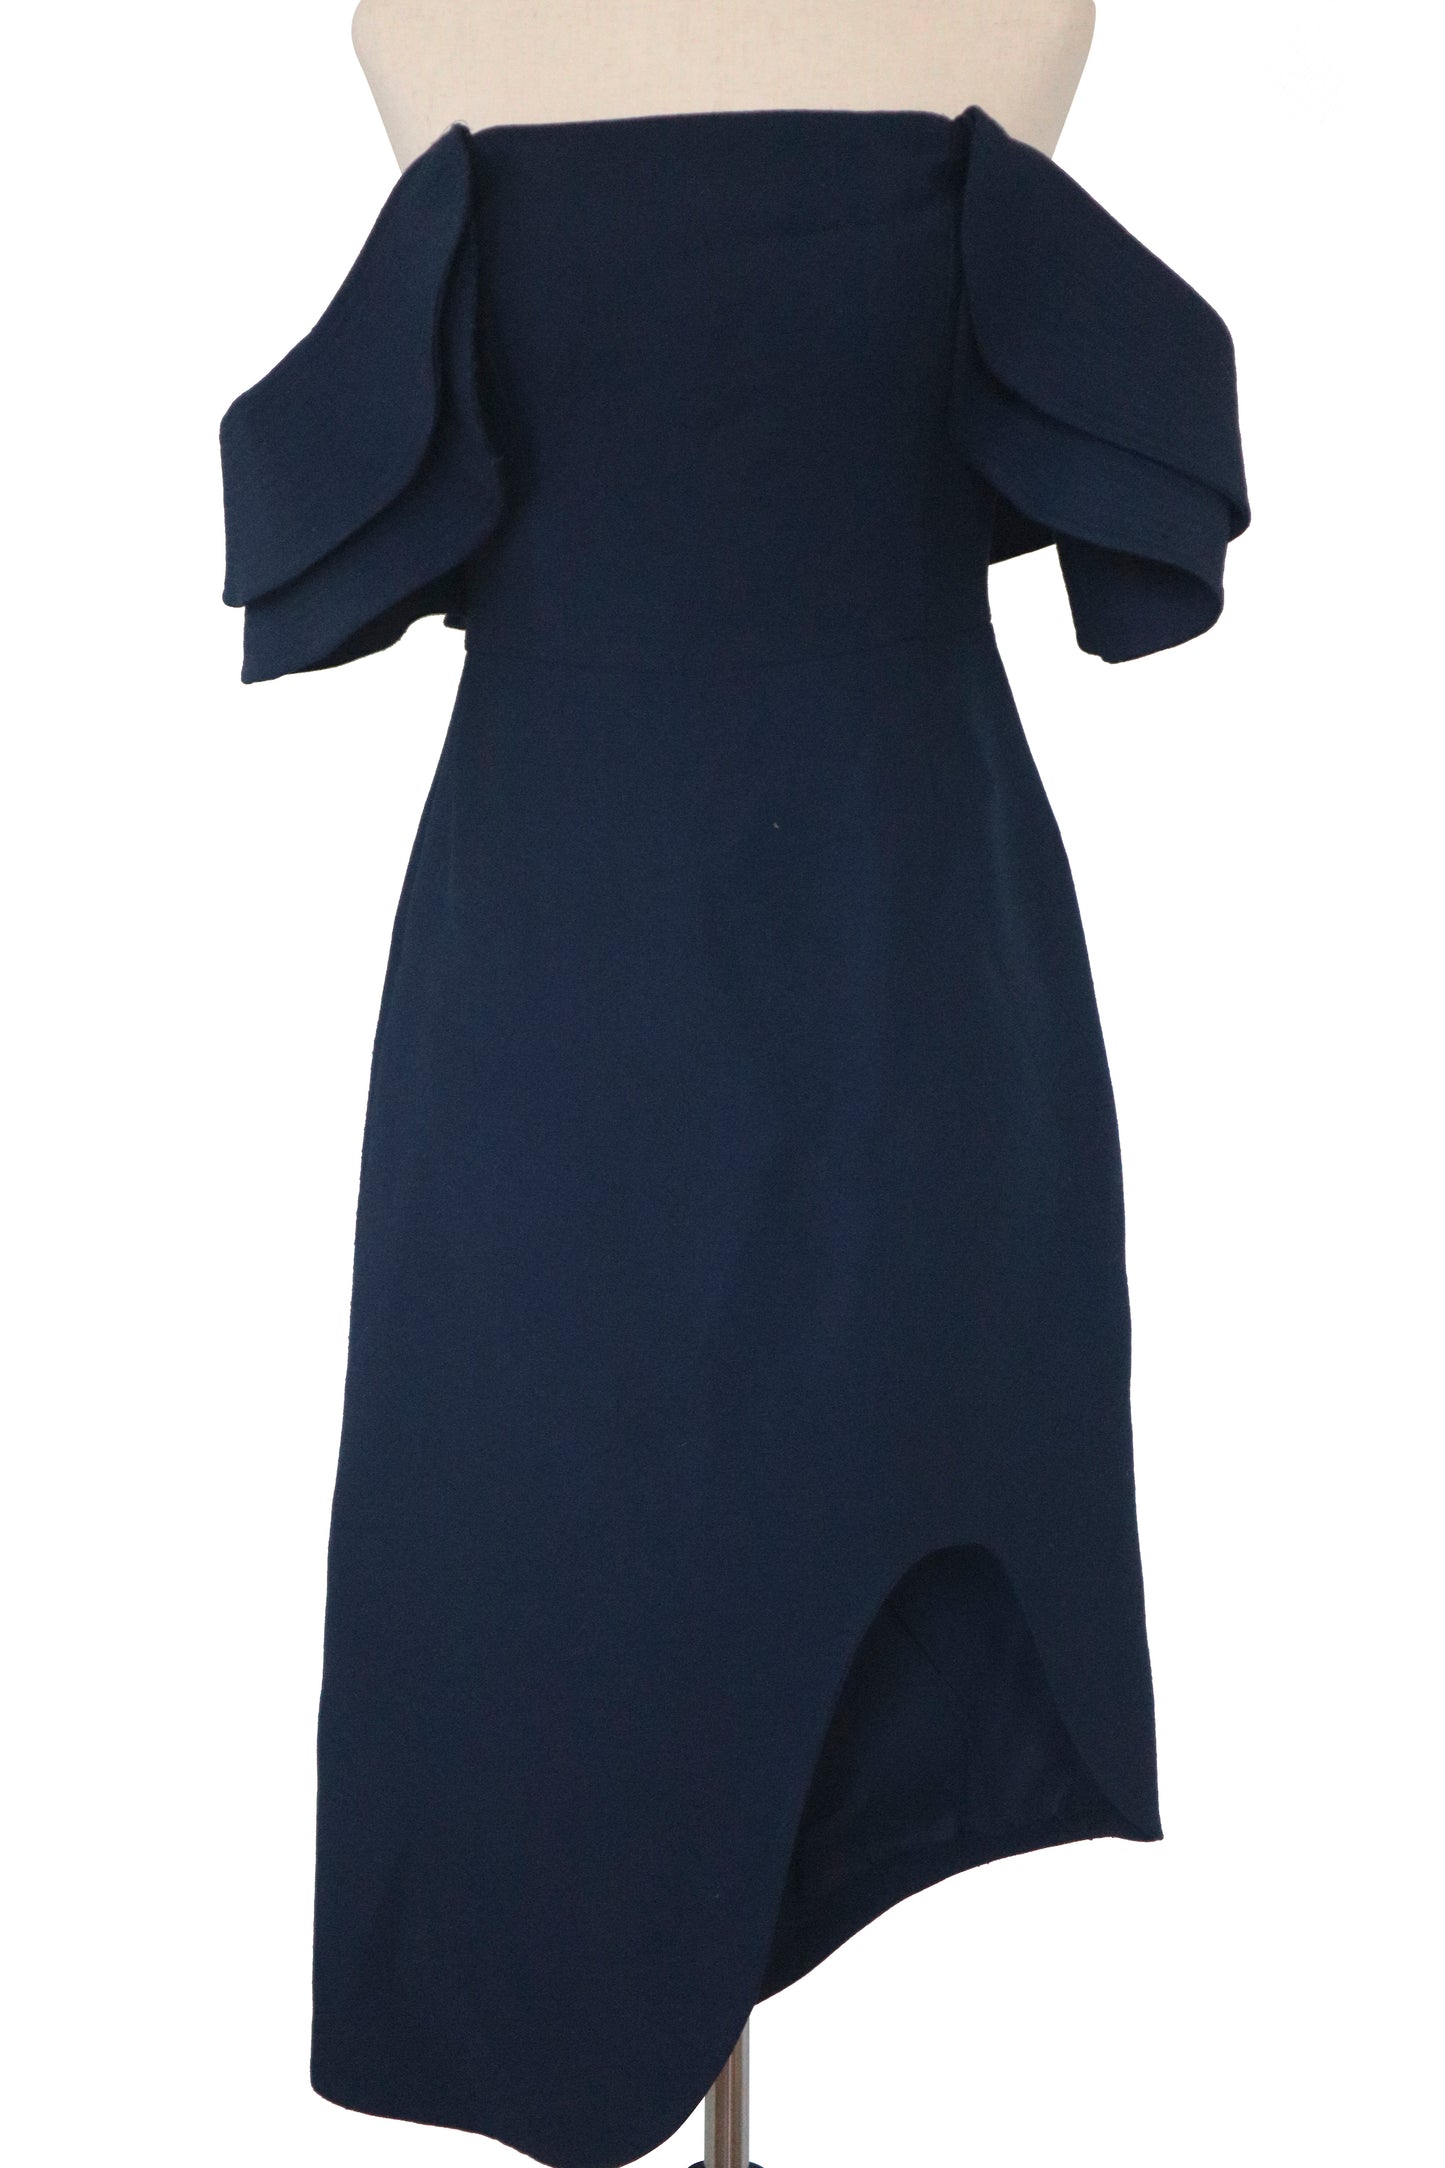 C/MEO COLLECTIVE - Navy Off The Shoulder Dress - Size M*